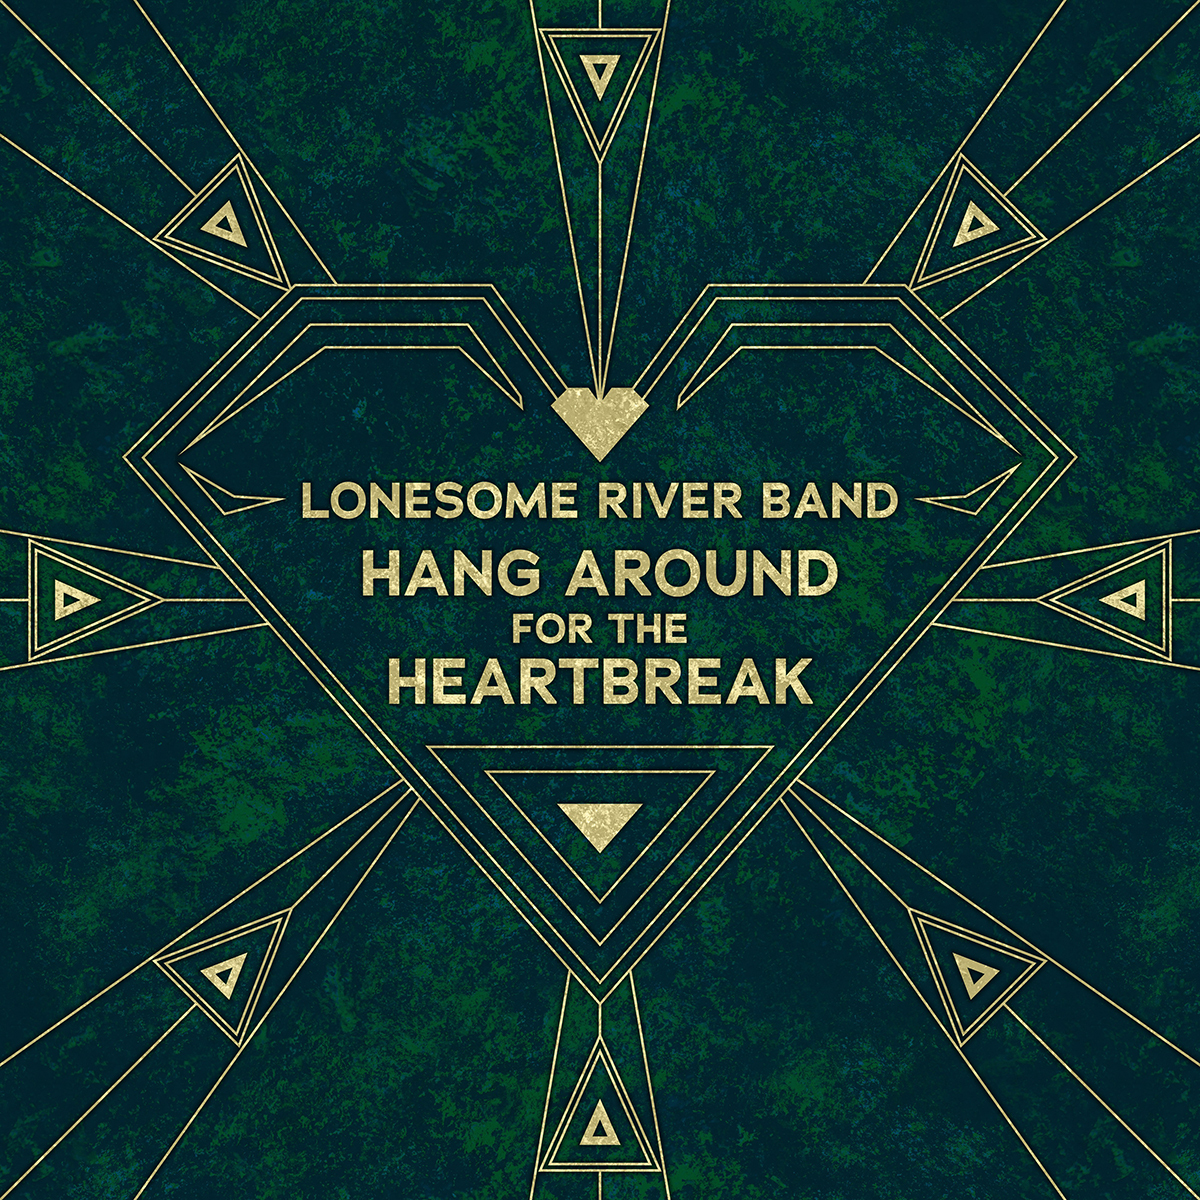 Lonesome River Band’s “Hang Around for the Heartbreak” has classic LRB sound